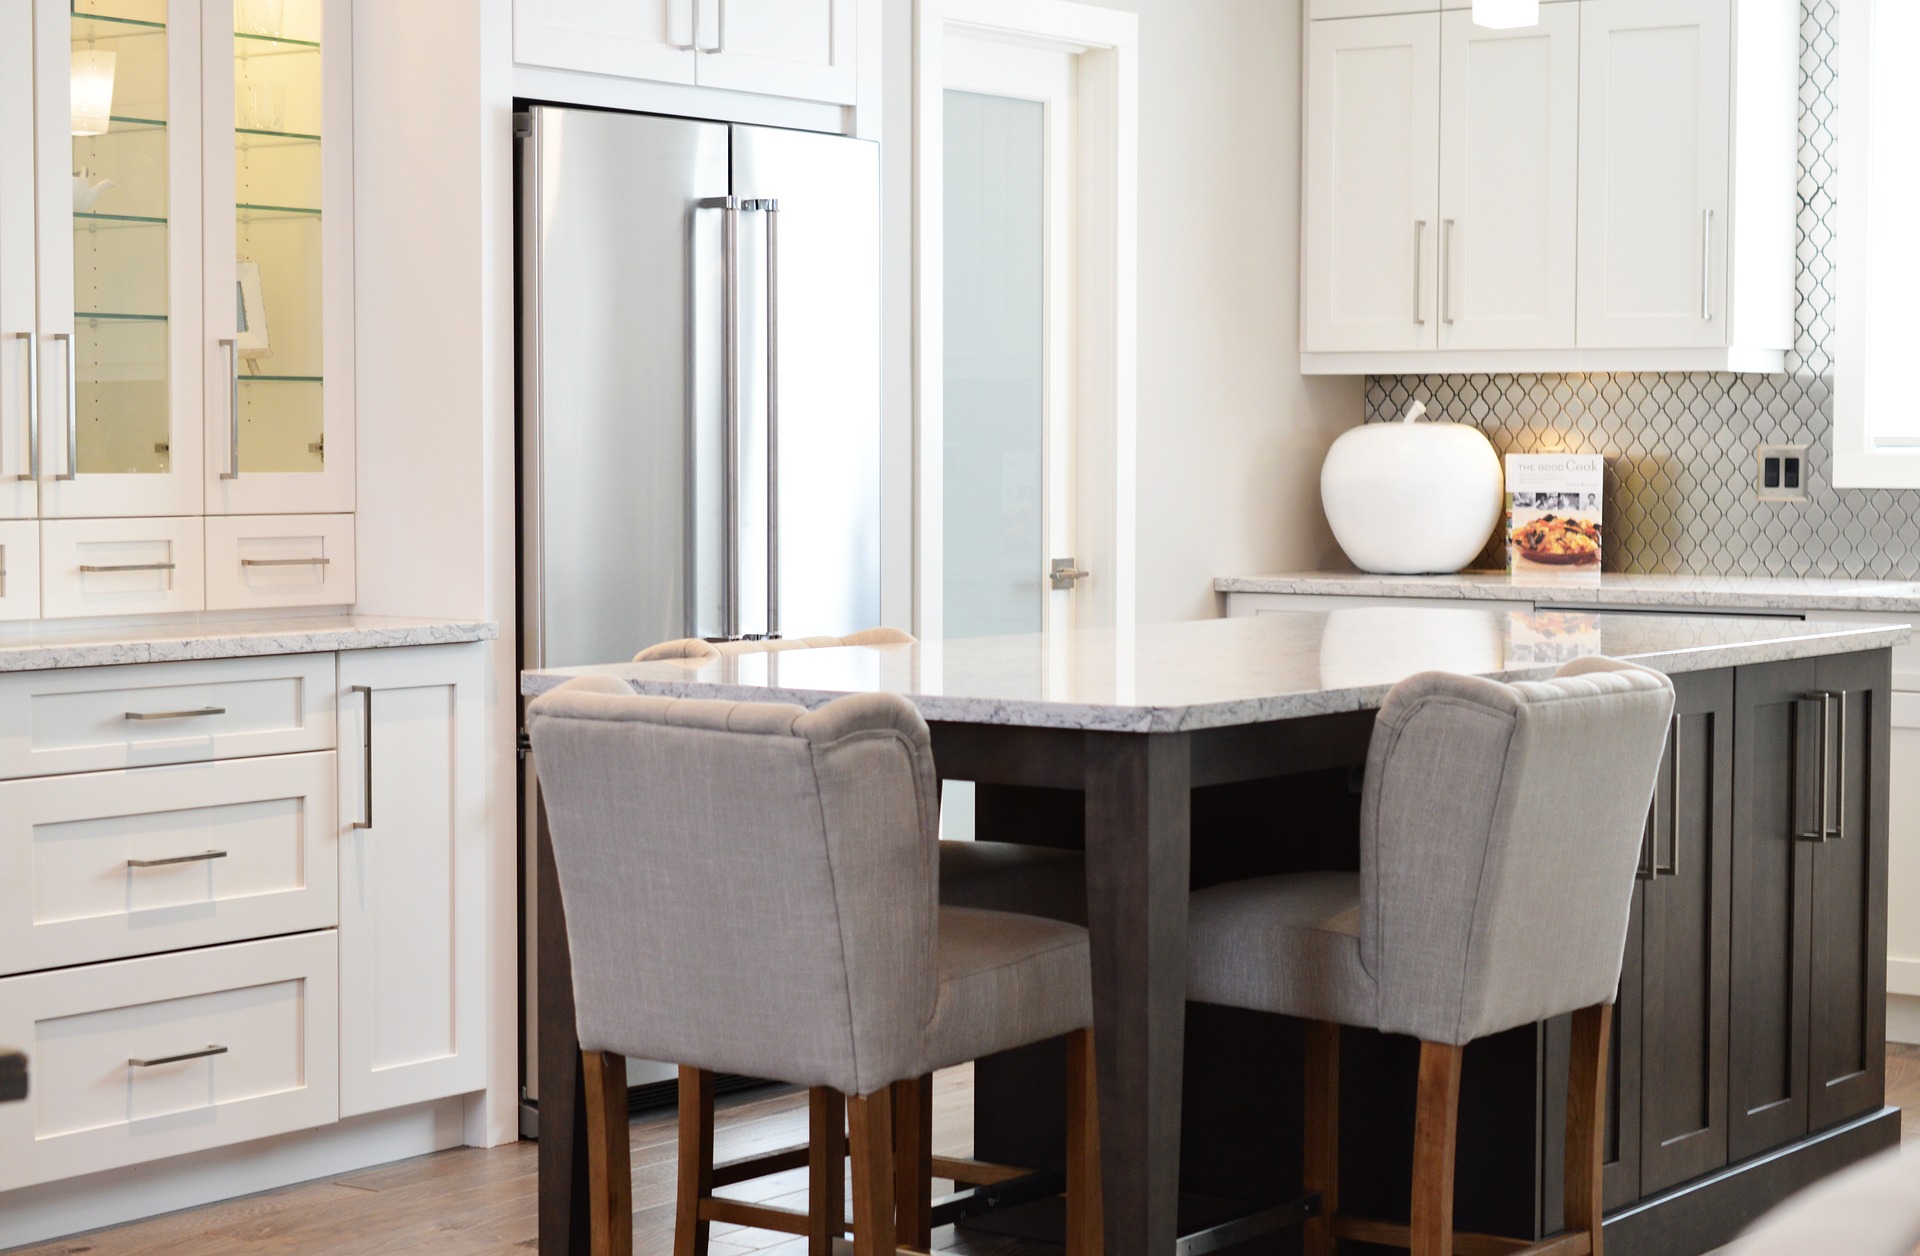 Upgrading Your Kitchen Without the Expense of Remodeling